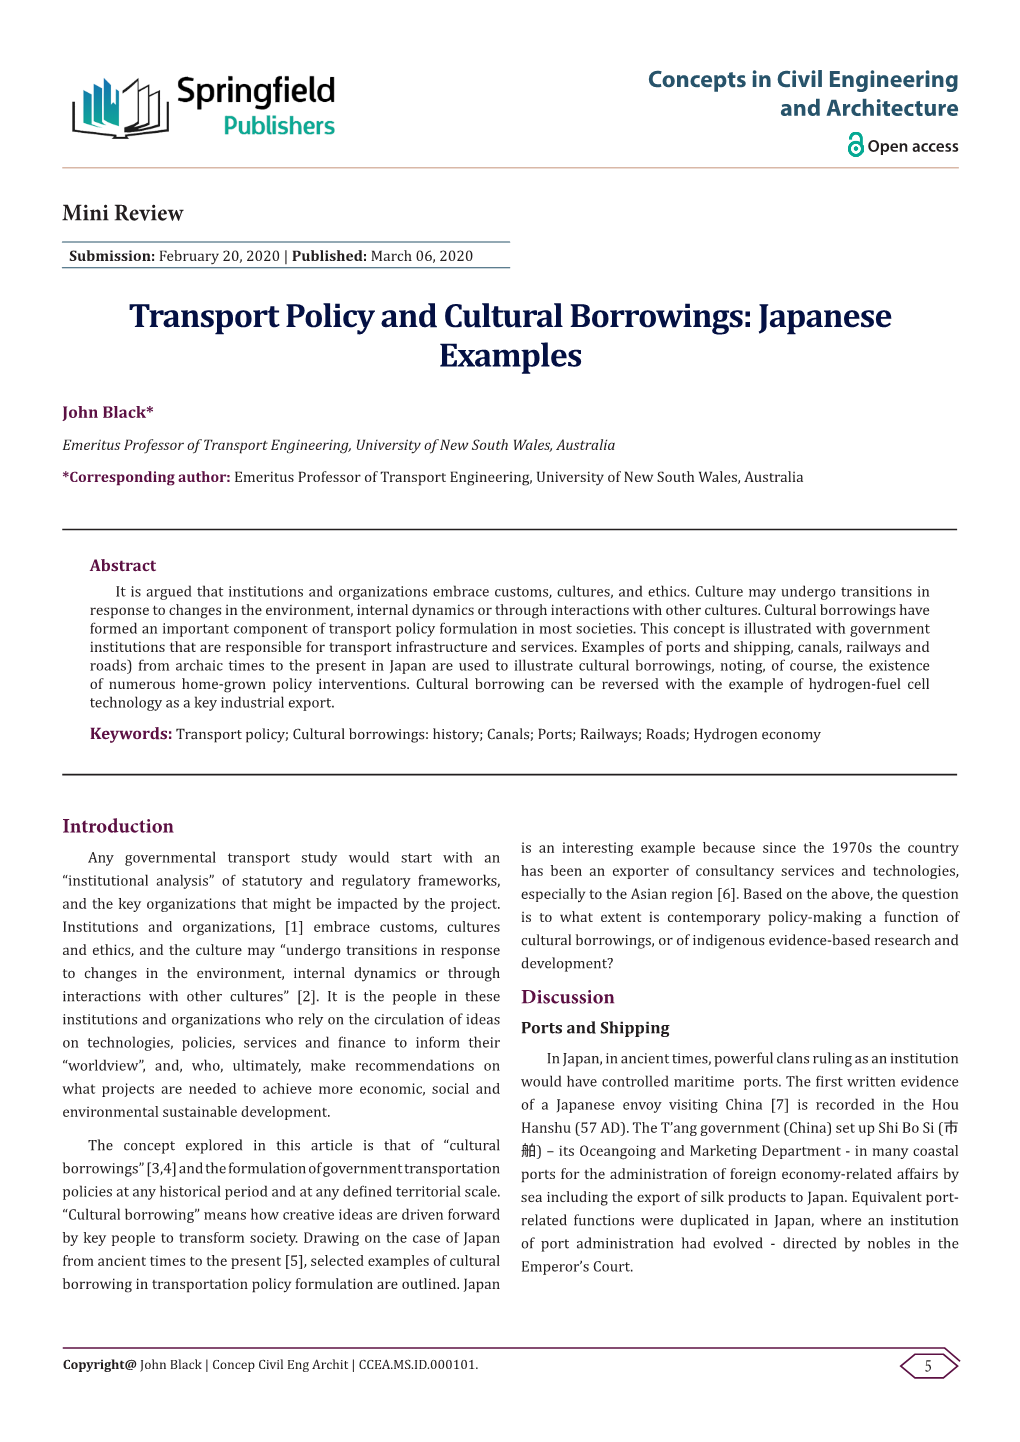 Transport Policy and Cultural Borrowings: Japanese Examples